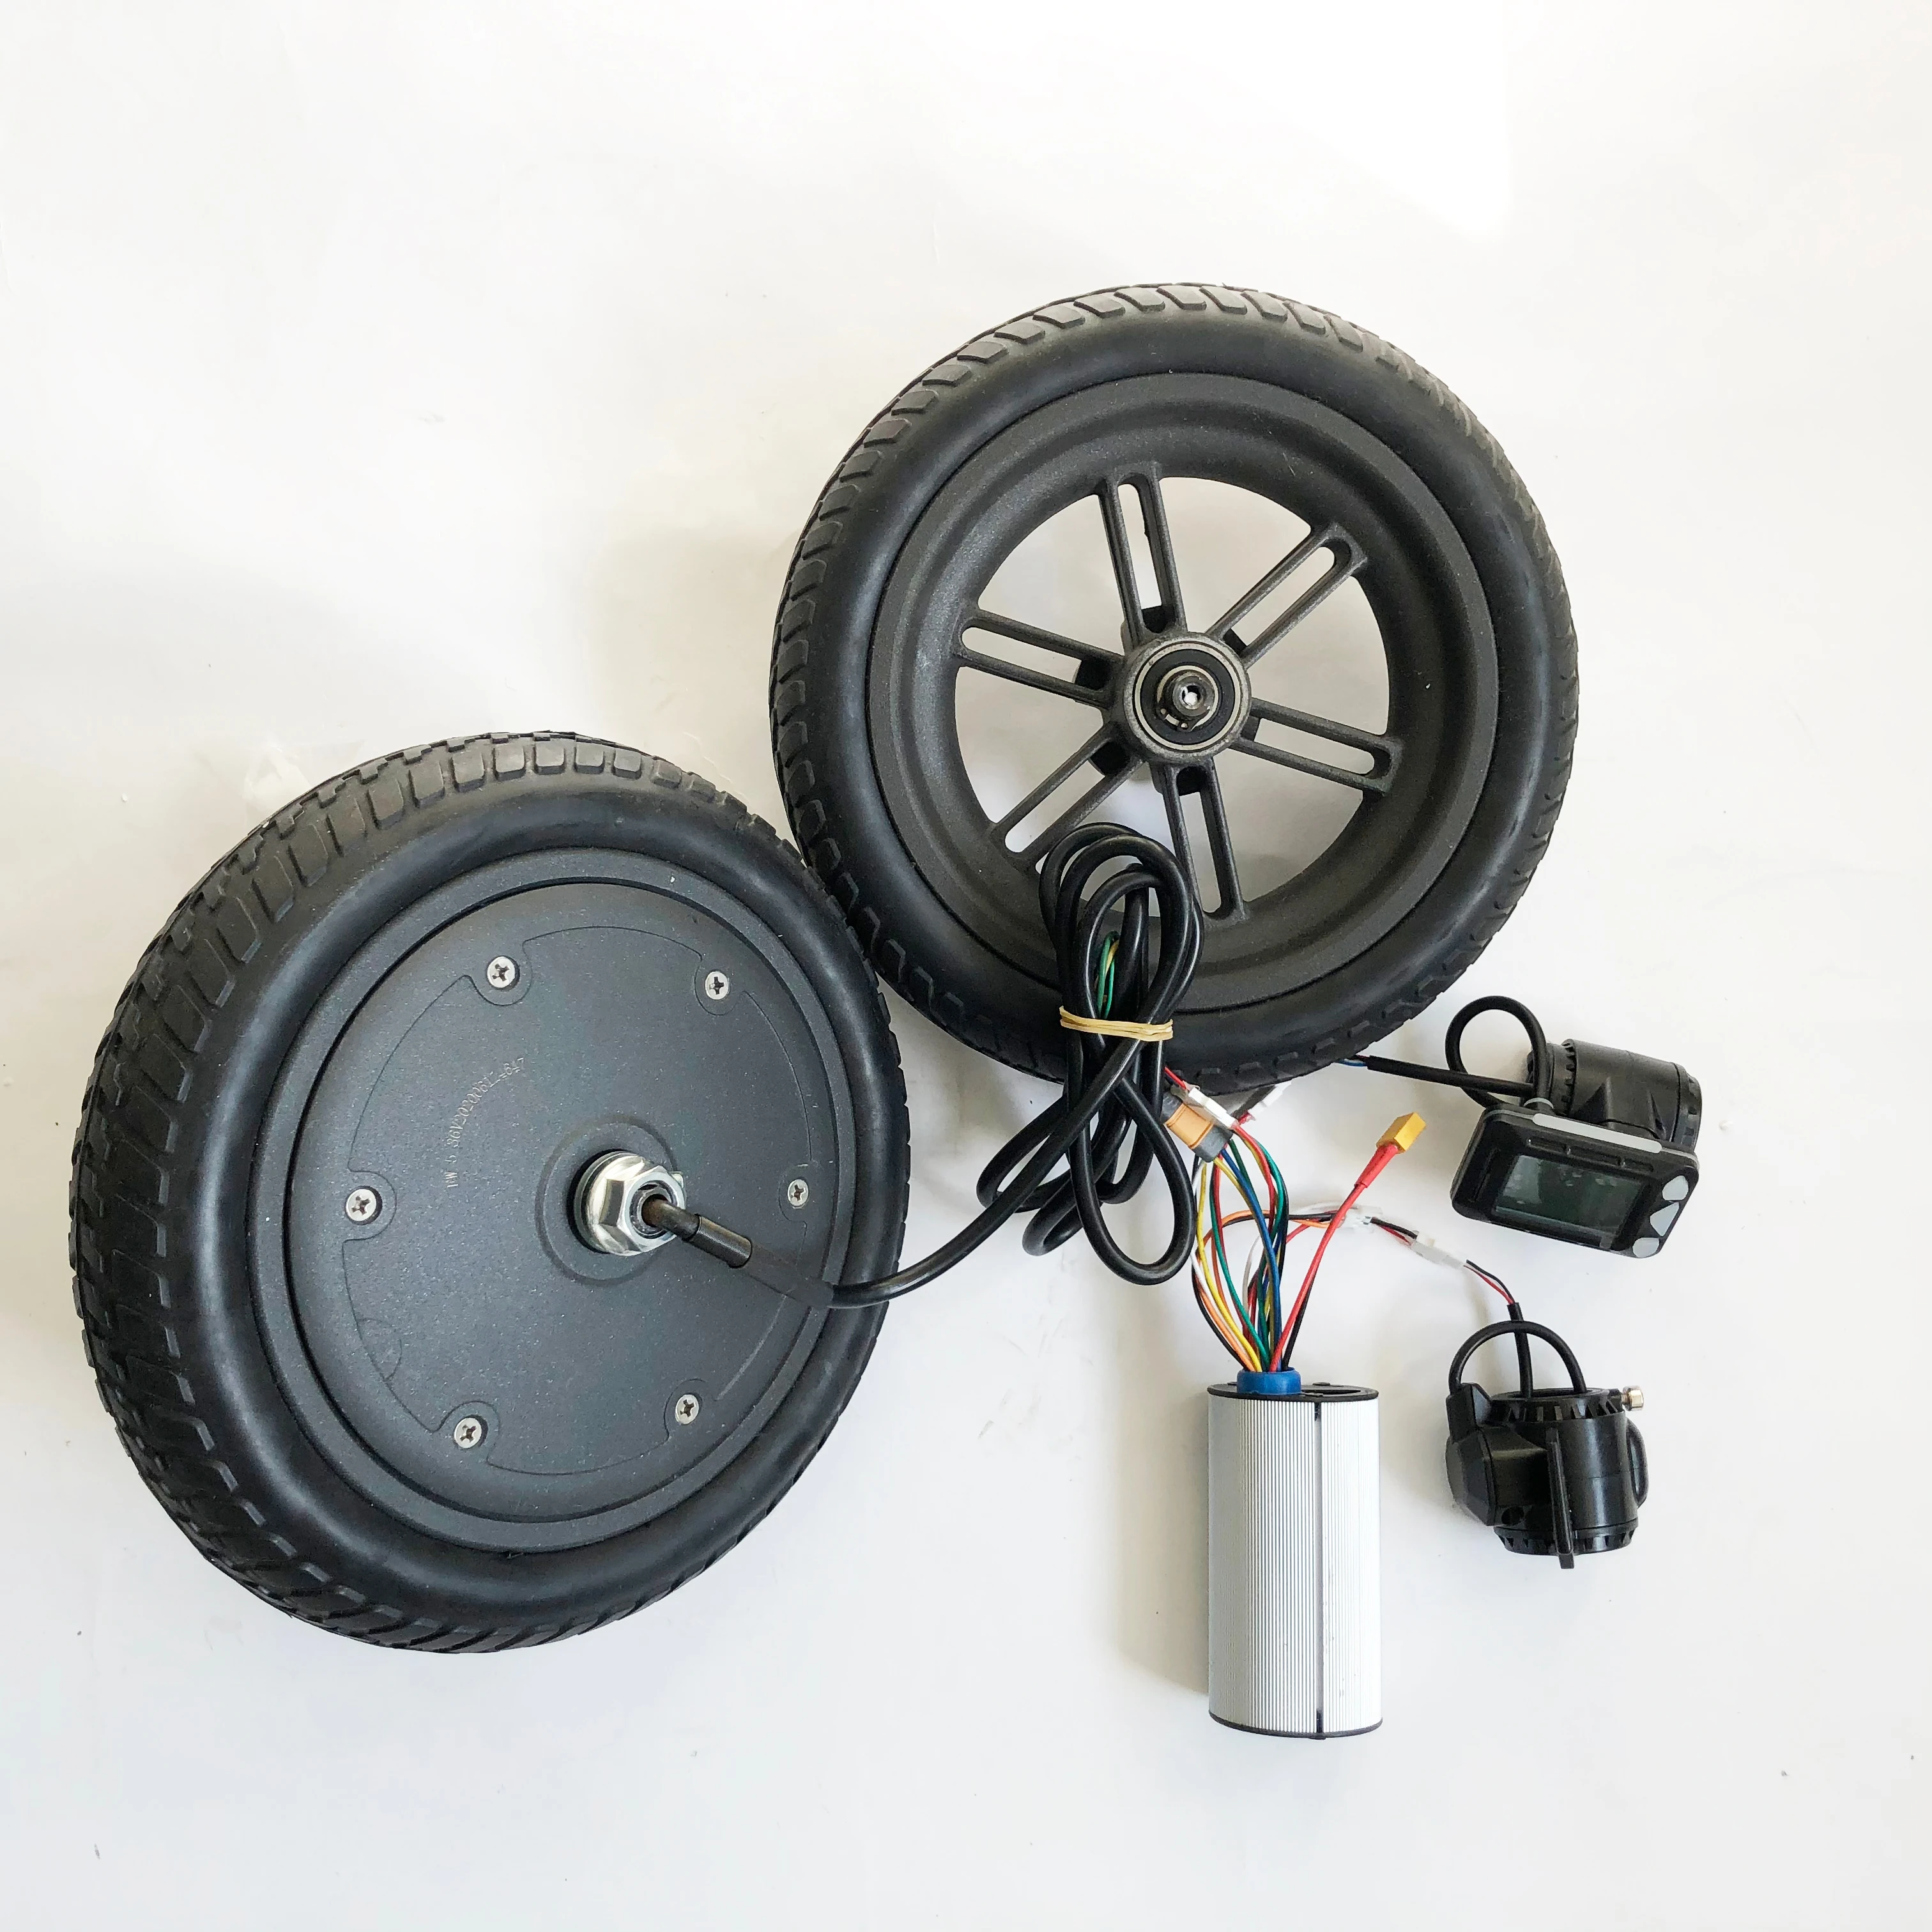 

8.5" Wheel Motor 36v 350w For Xiaomi M365 Pro Standing Scooter Folding Skateboard DIY Kit Electric Bicycle